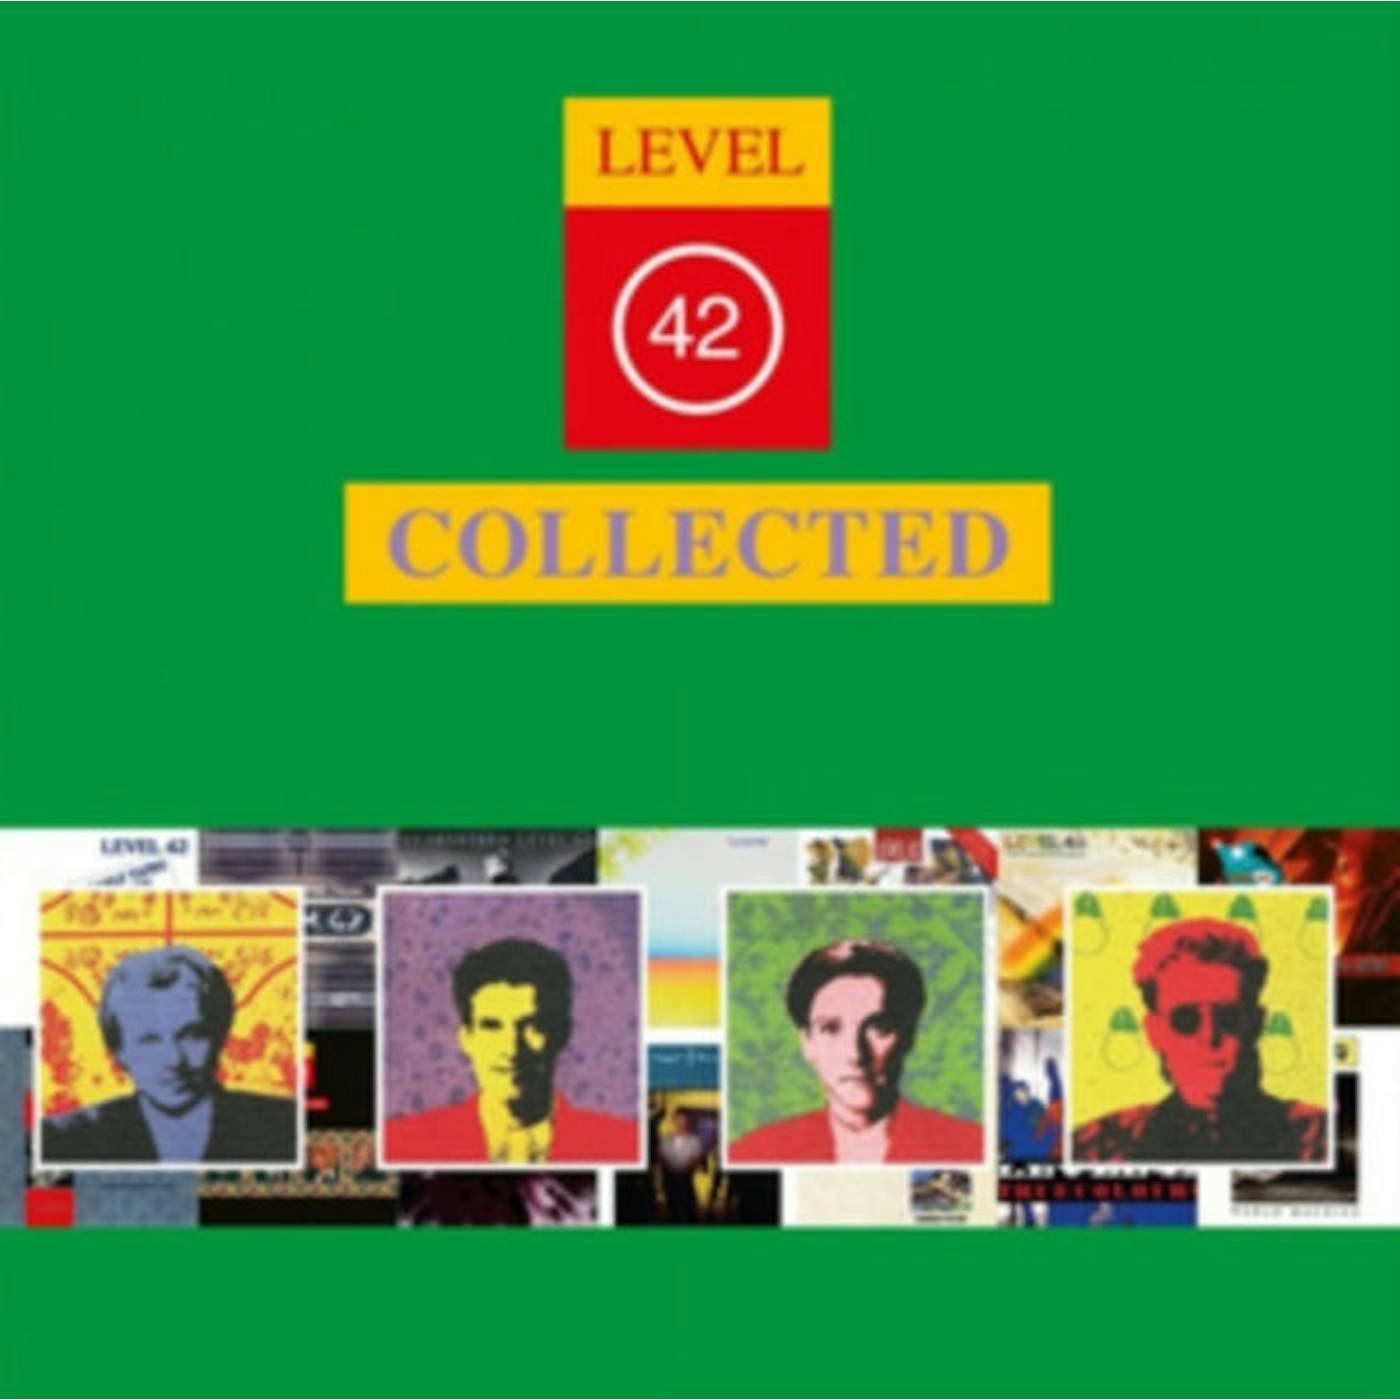 Level 42 LP Vinyl Record - Collected